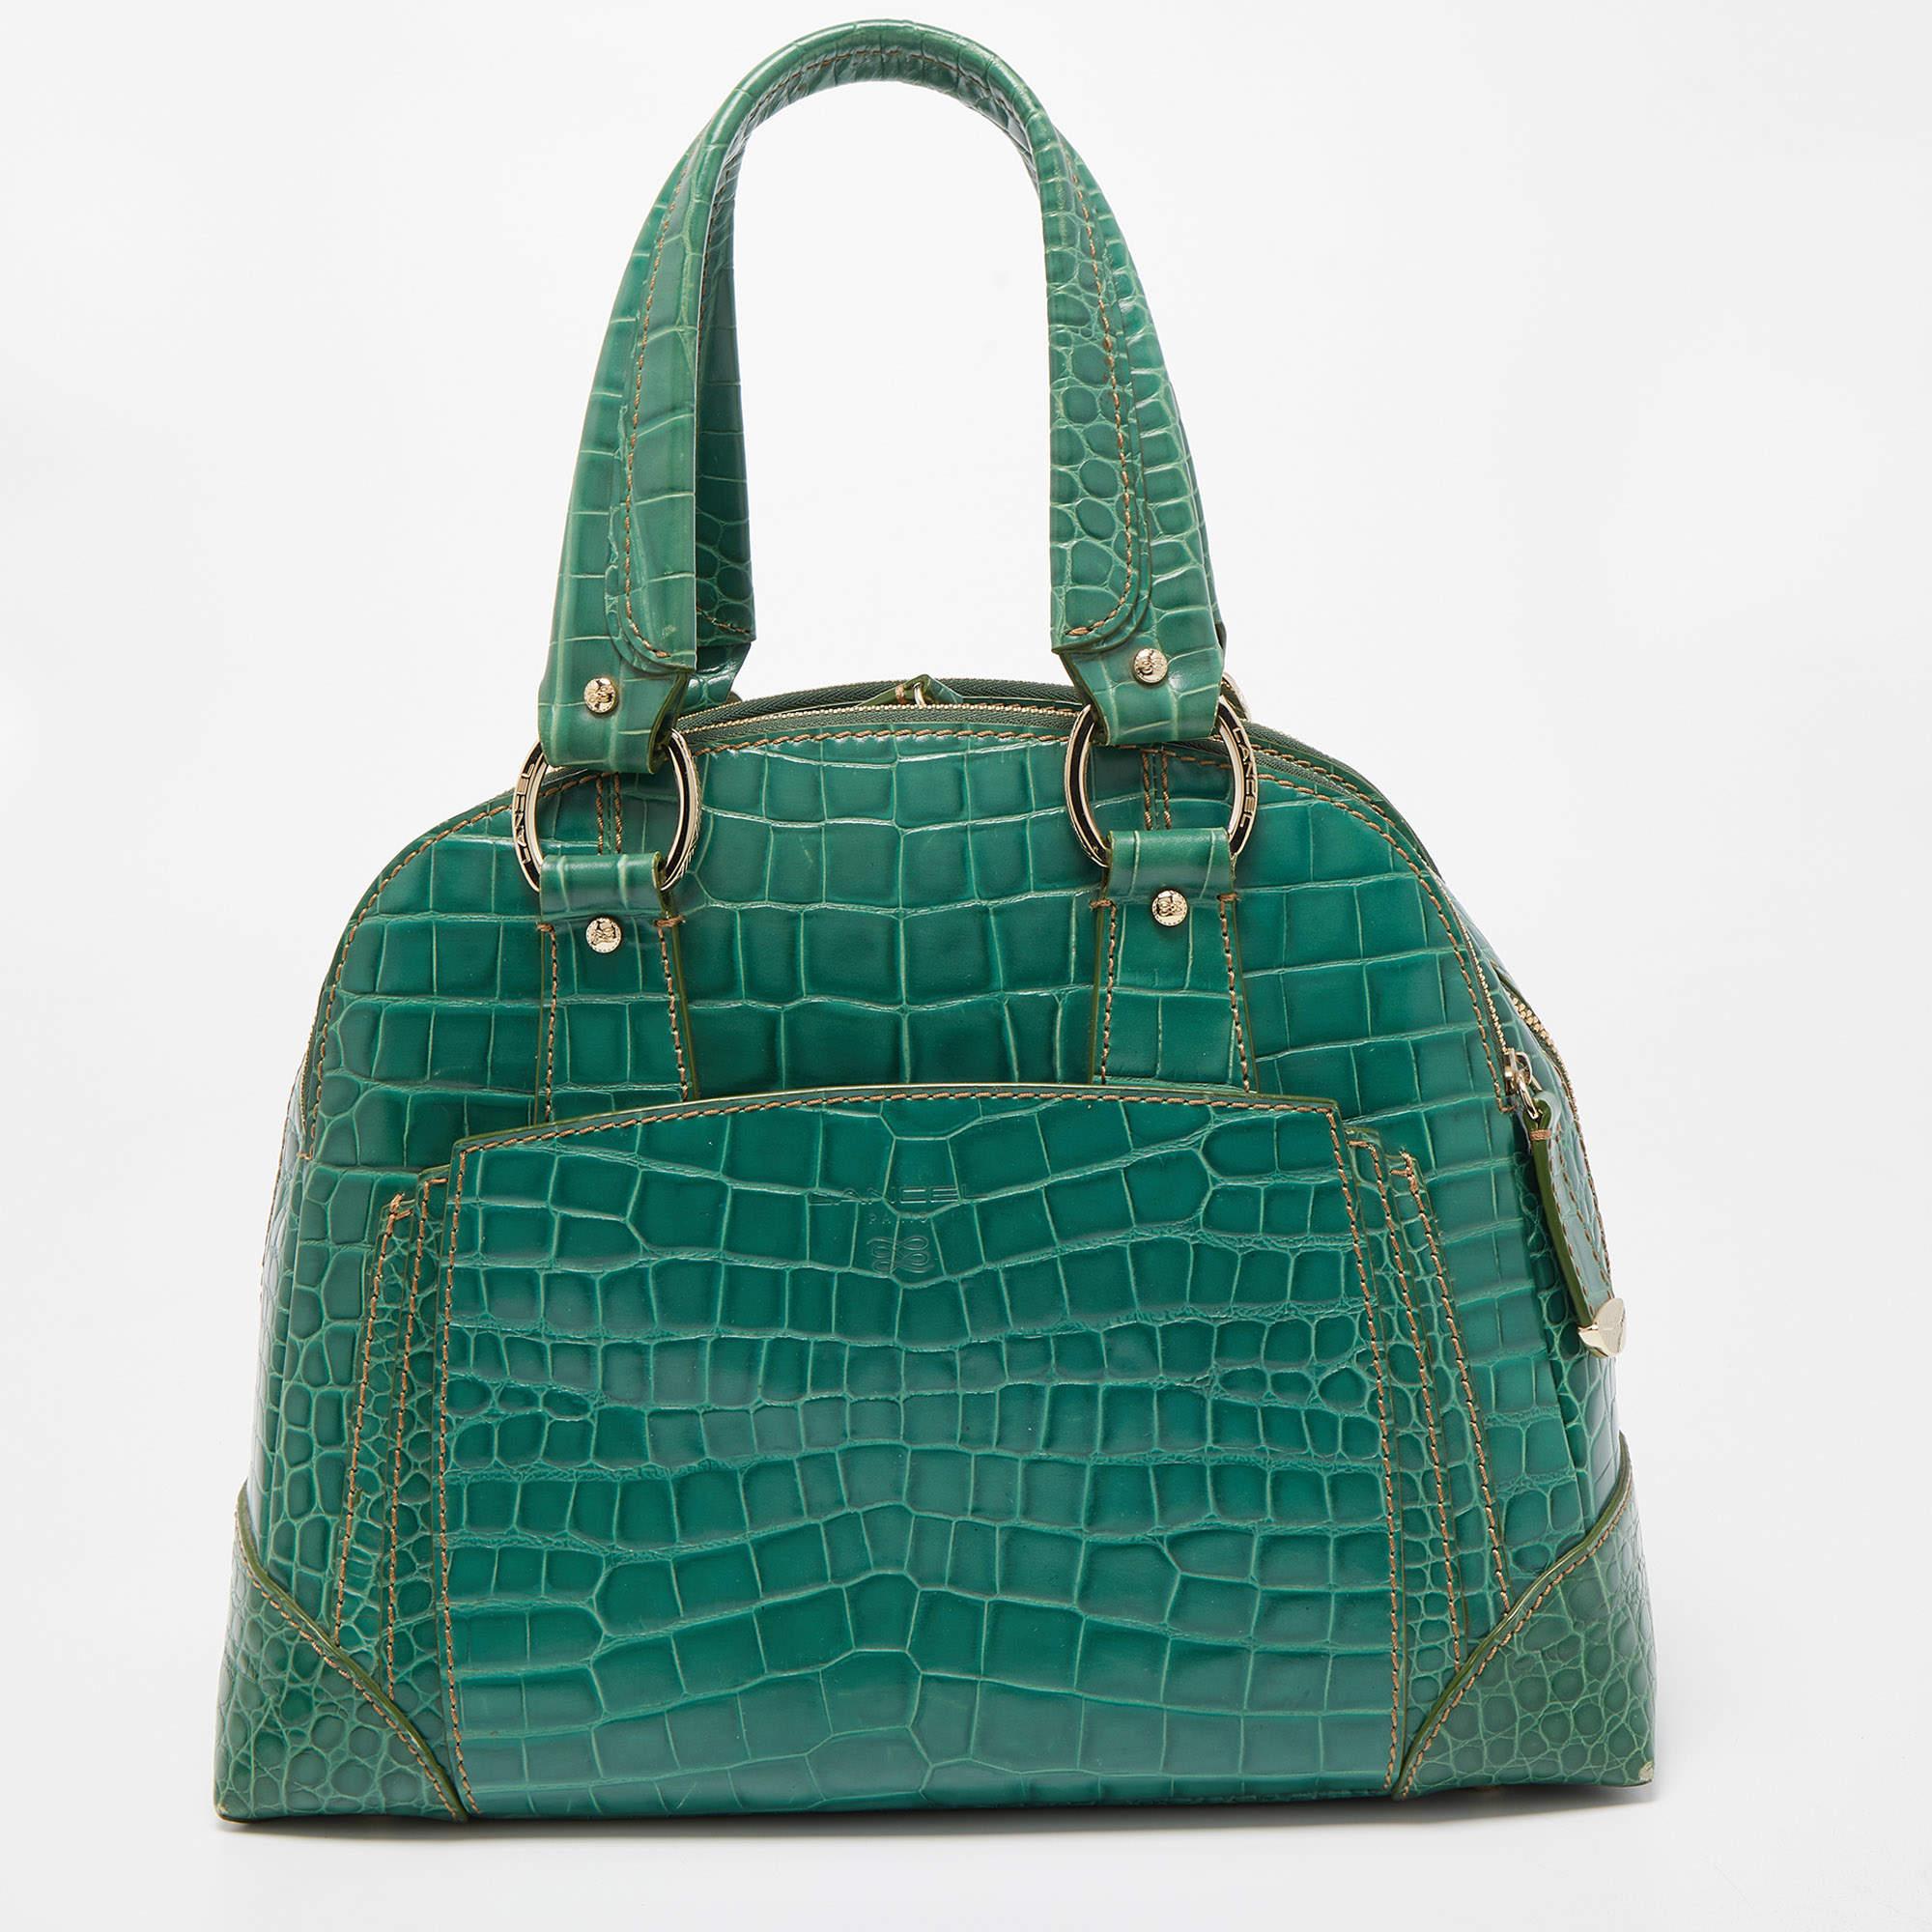 Inspired by and named after the French actress Isabelle Adjani, this luxurious bag was an instant hit when it was released in 2009, soon after which it was completely sold out. This Adjani showcases classic luxury with its croc-embossed leather